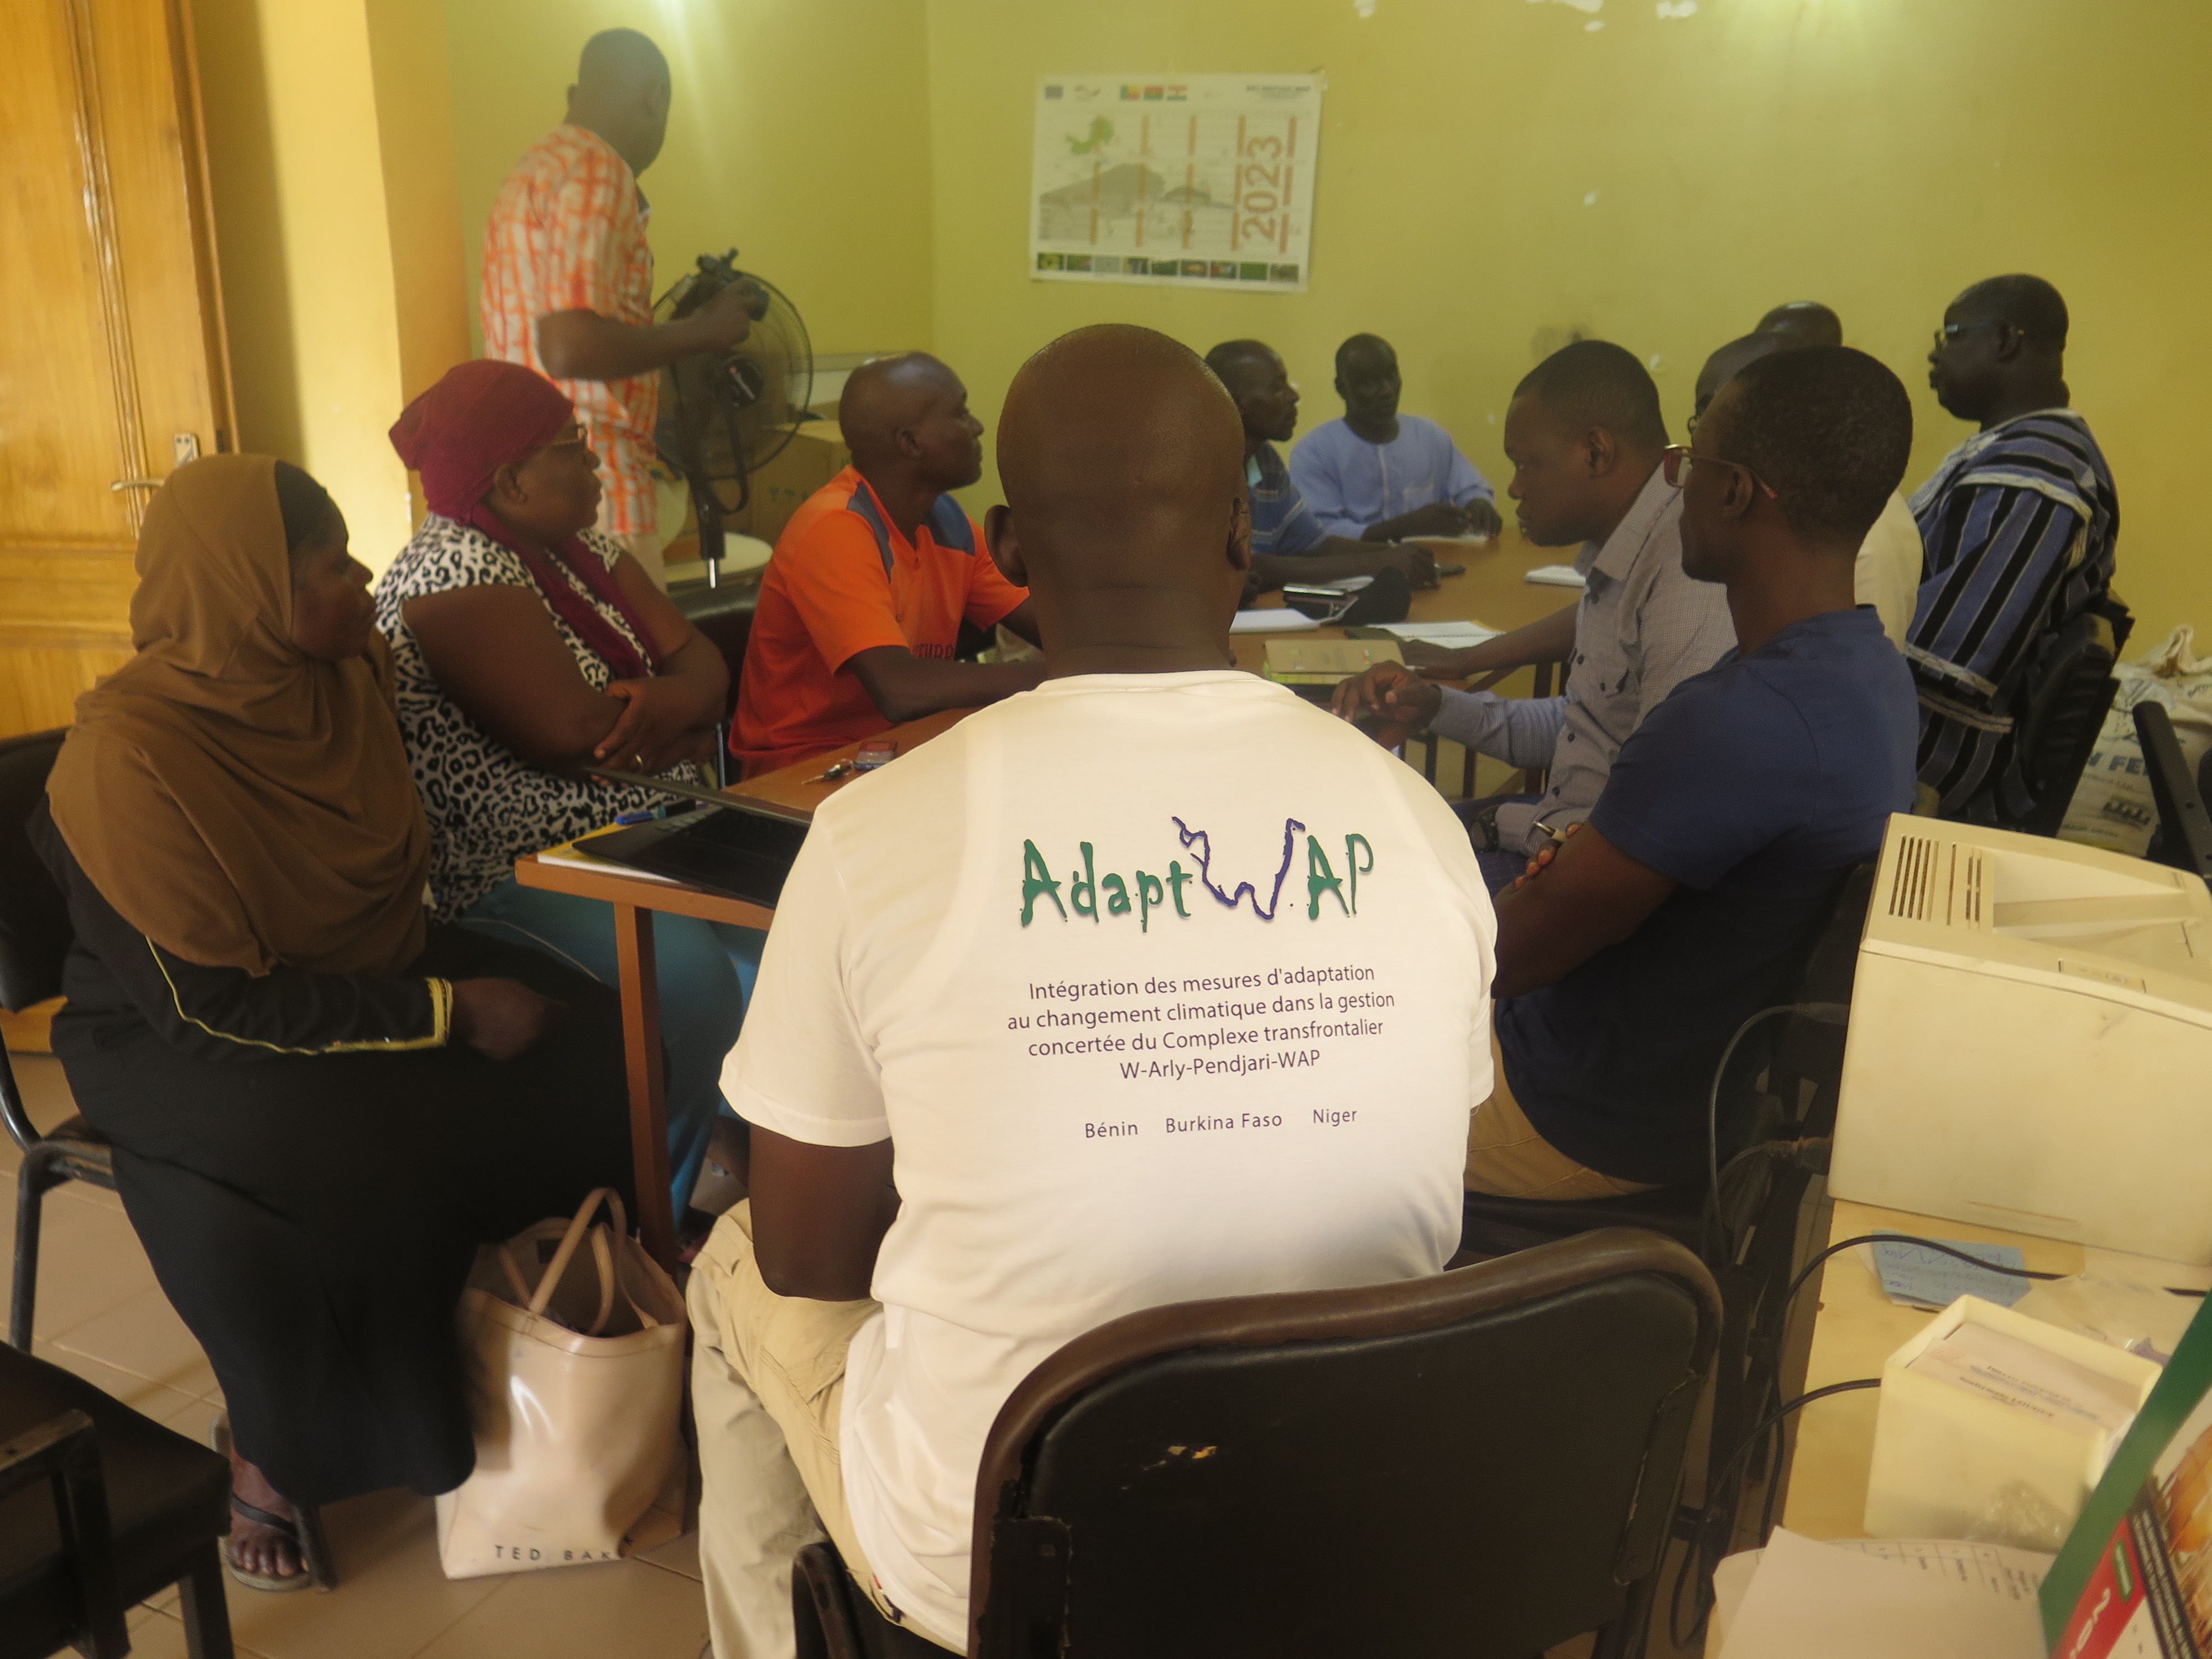 Mission to Support the AdaptWAP Project in Burkina Faso